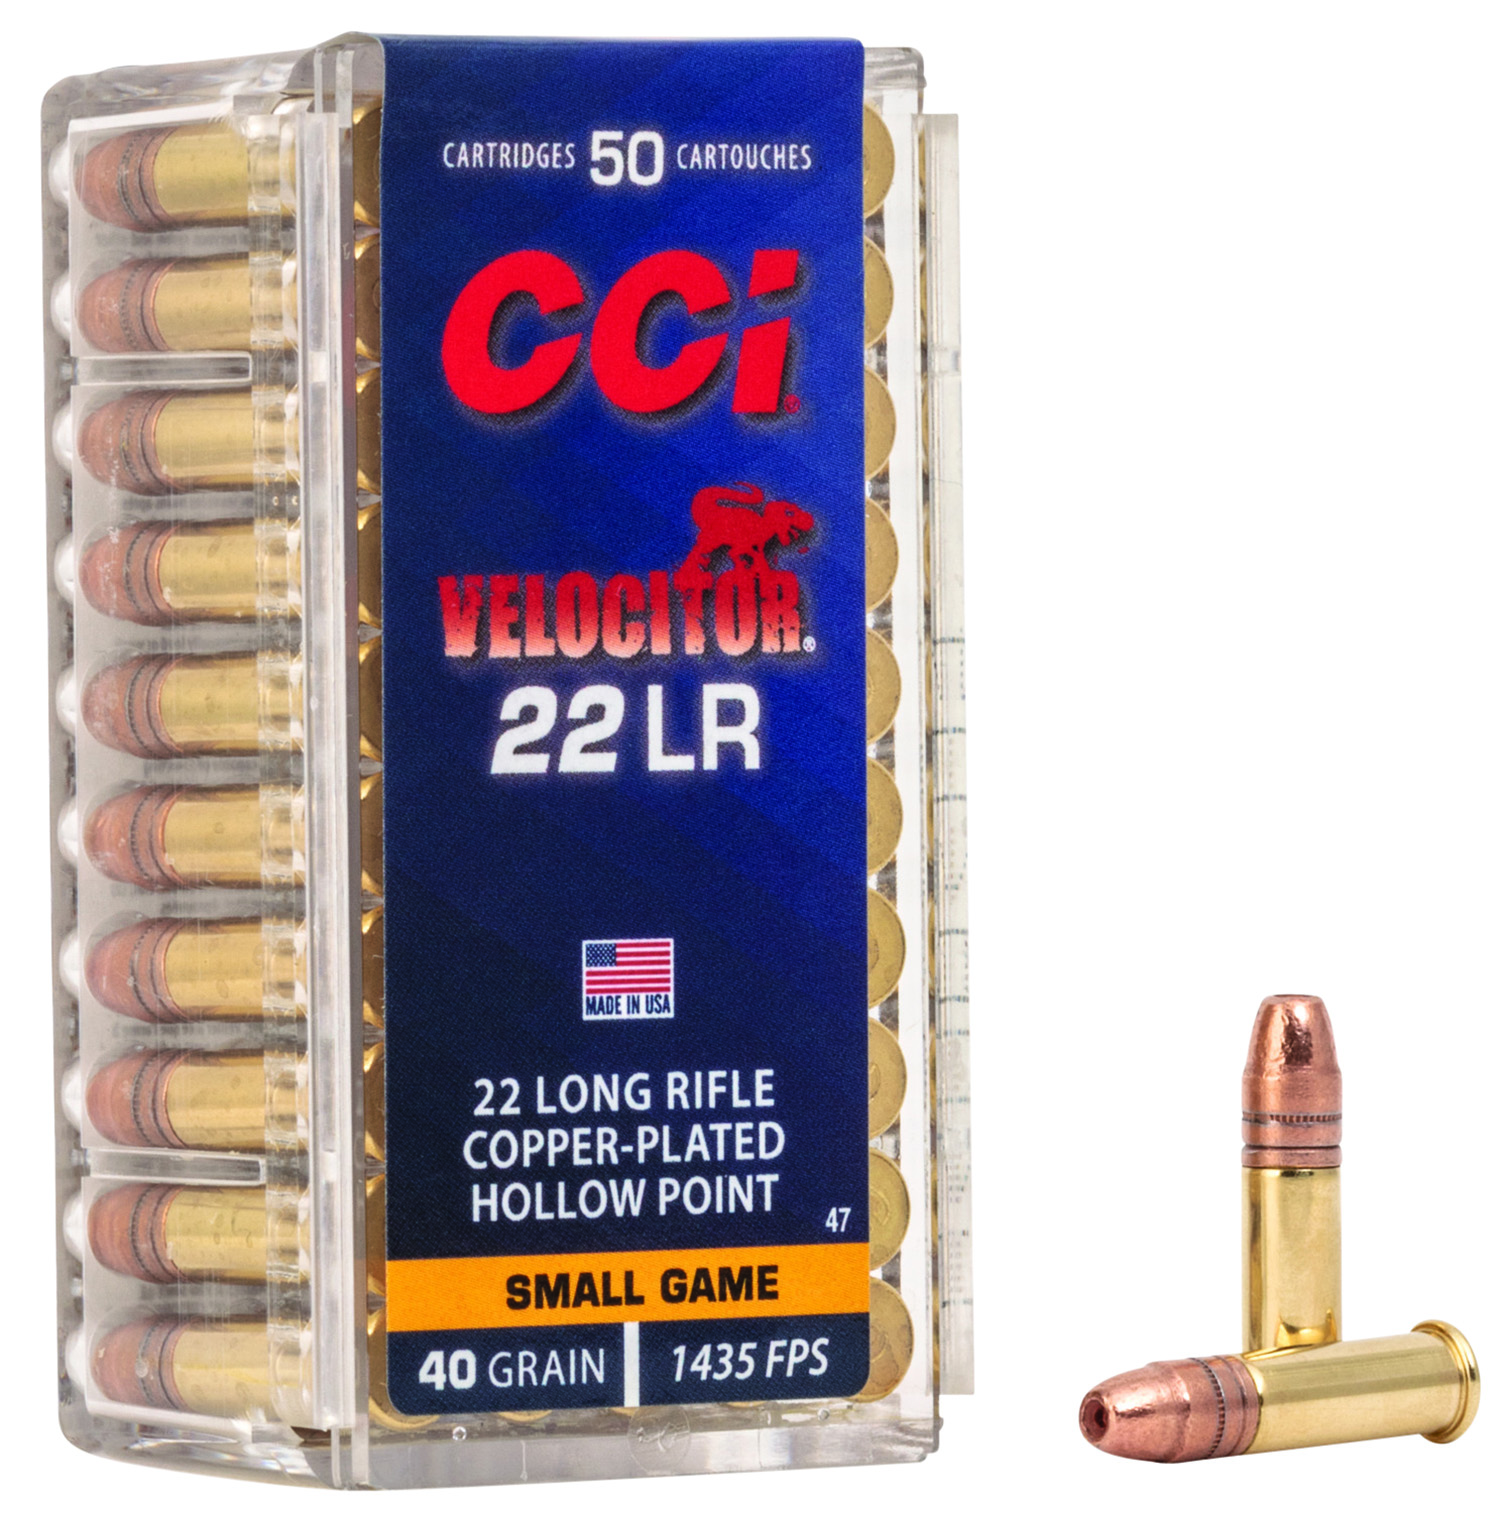 CCI 0047 Velocitor  22 LR 40 gr Copper Plated Hollow Point (CPHP) 50 Bx/ 100 Cs